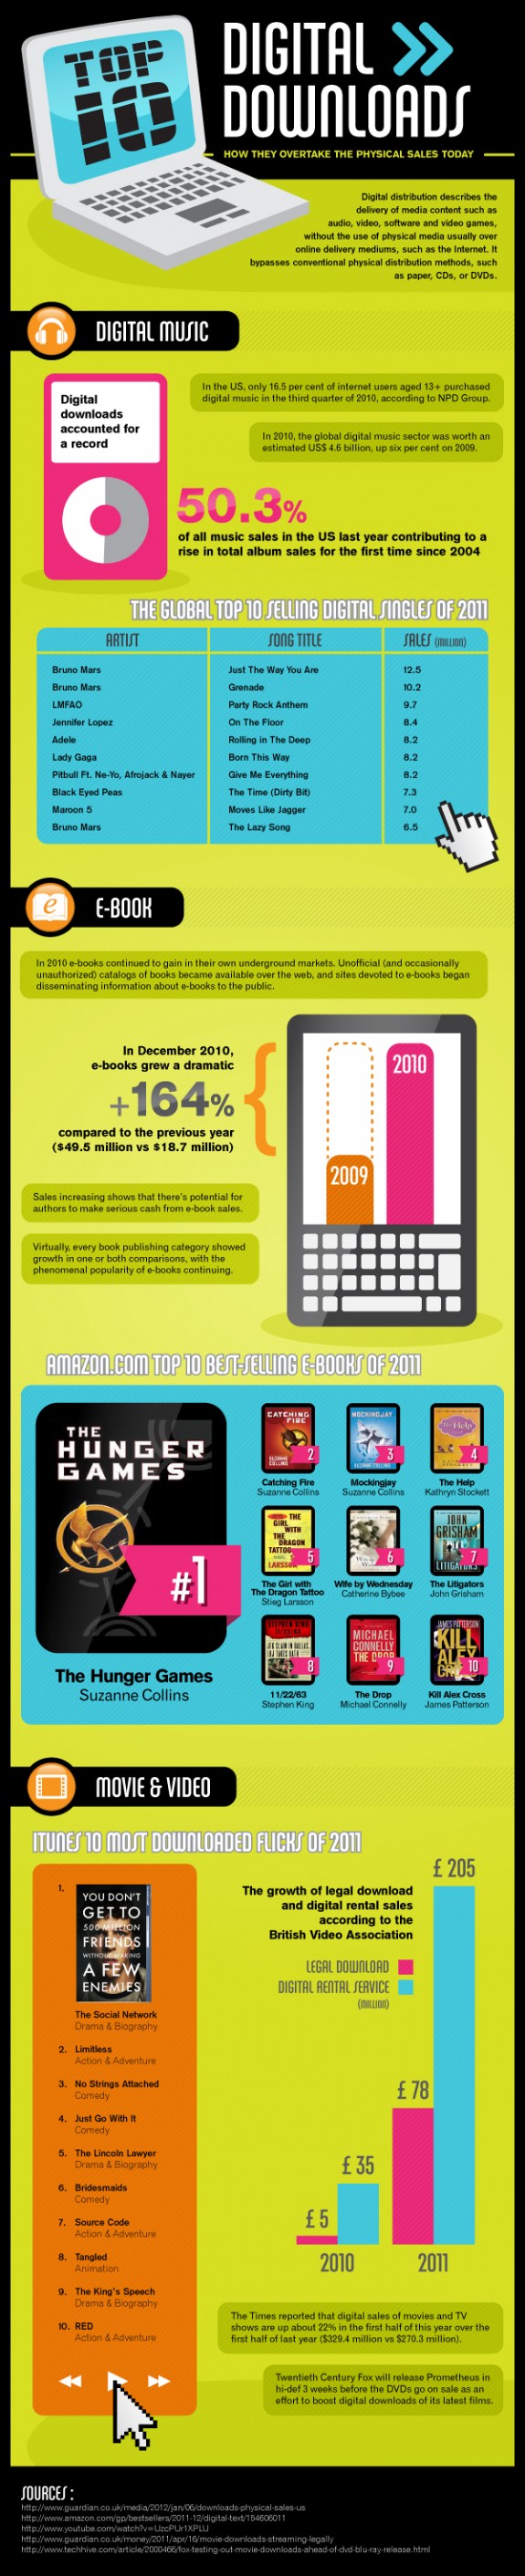 Infographic for Digital Downloads Infographic